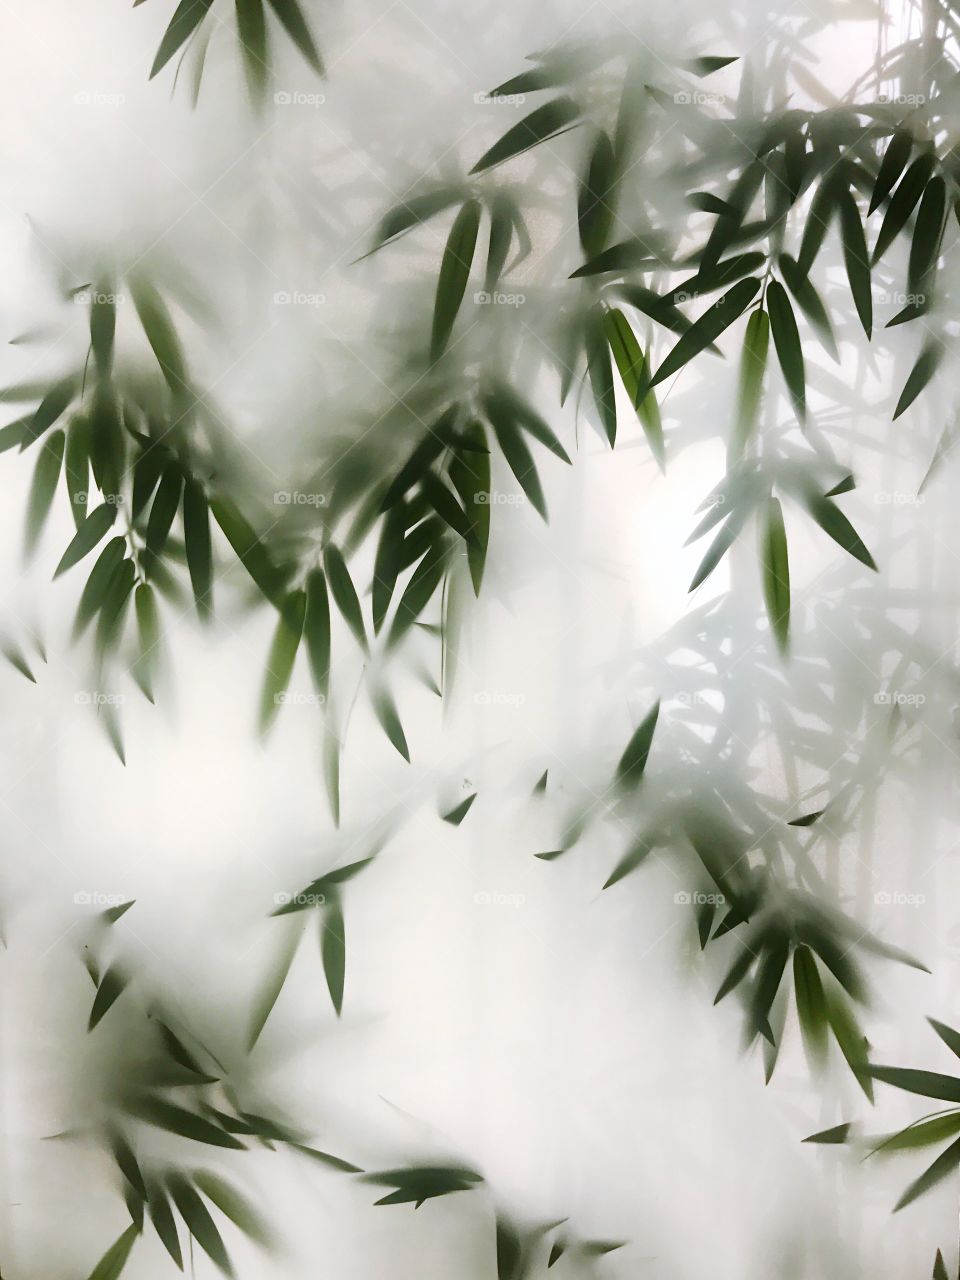 Fog covered the bamboo leaves